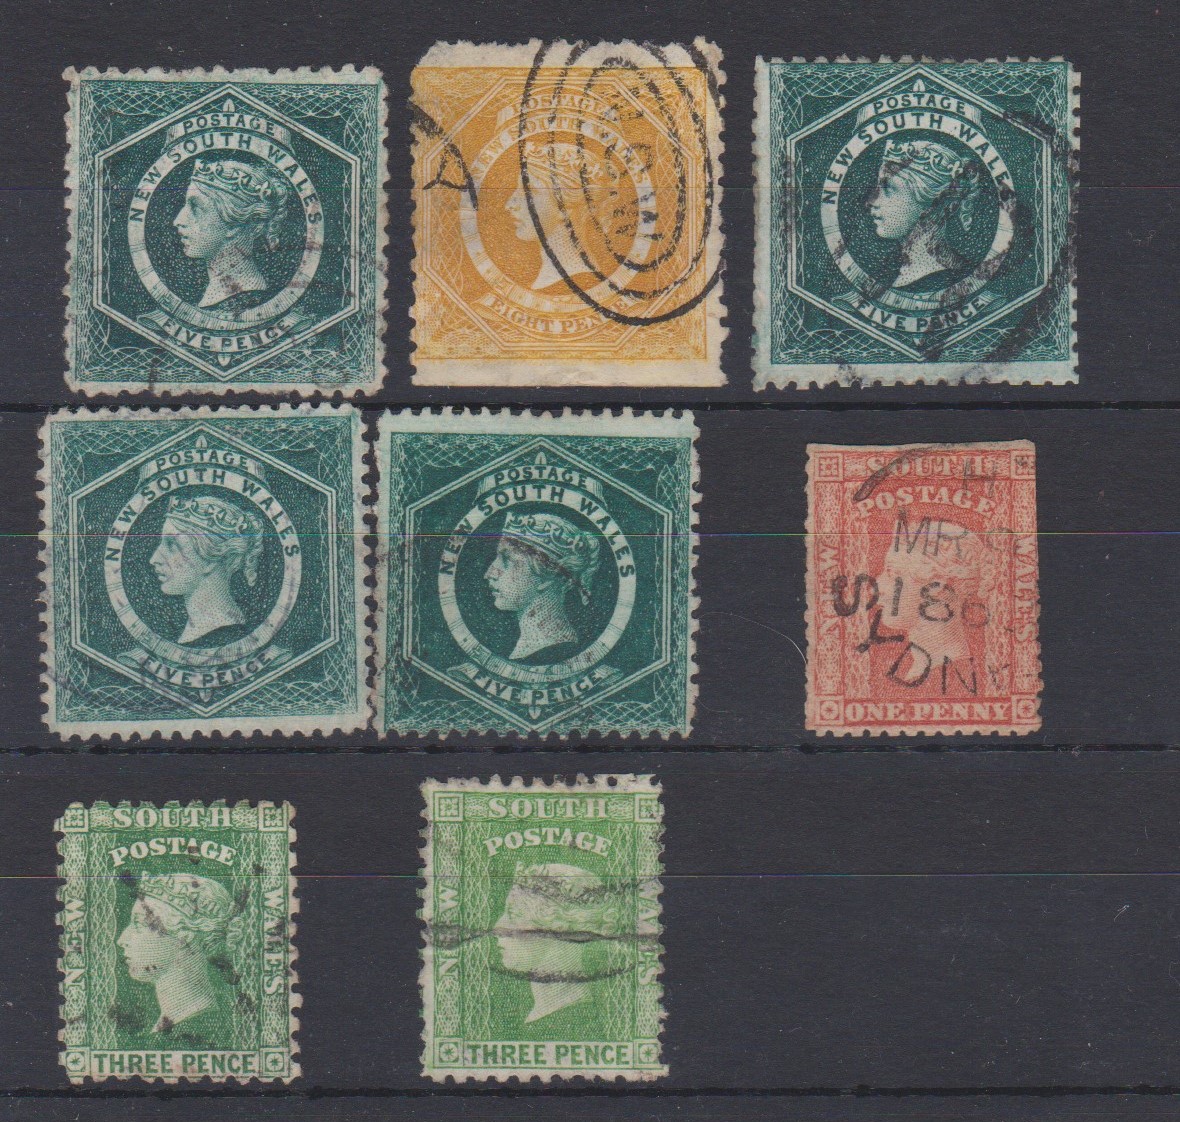 New South Wales 1860-1886 definitives SG 215b used 5f, 218 used 8d, 1885 SG 215 used 5d, 233a used